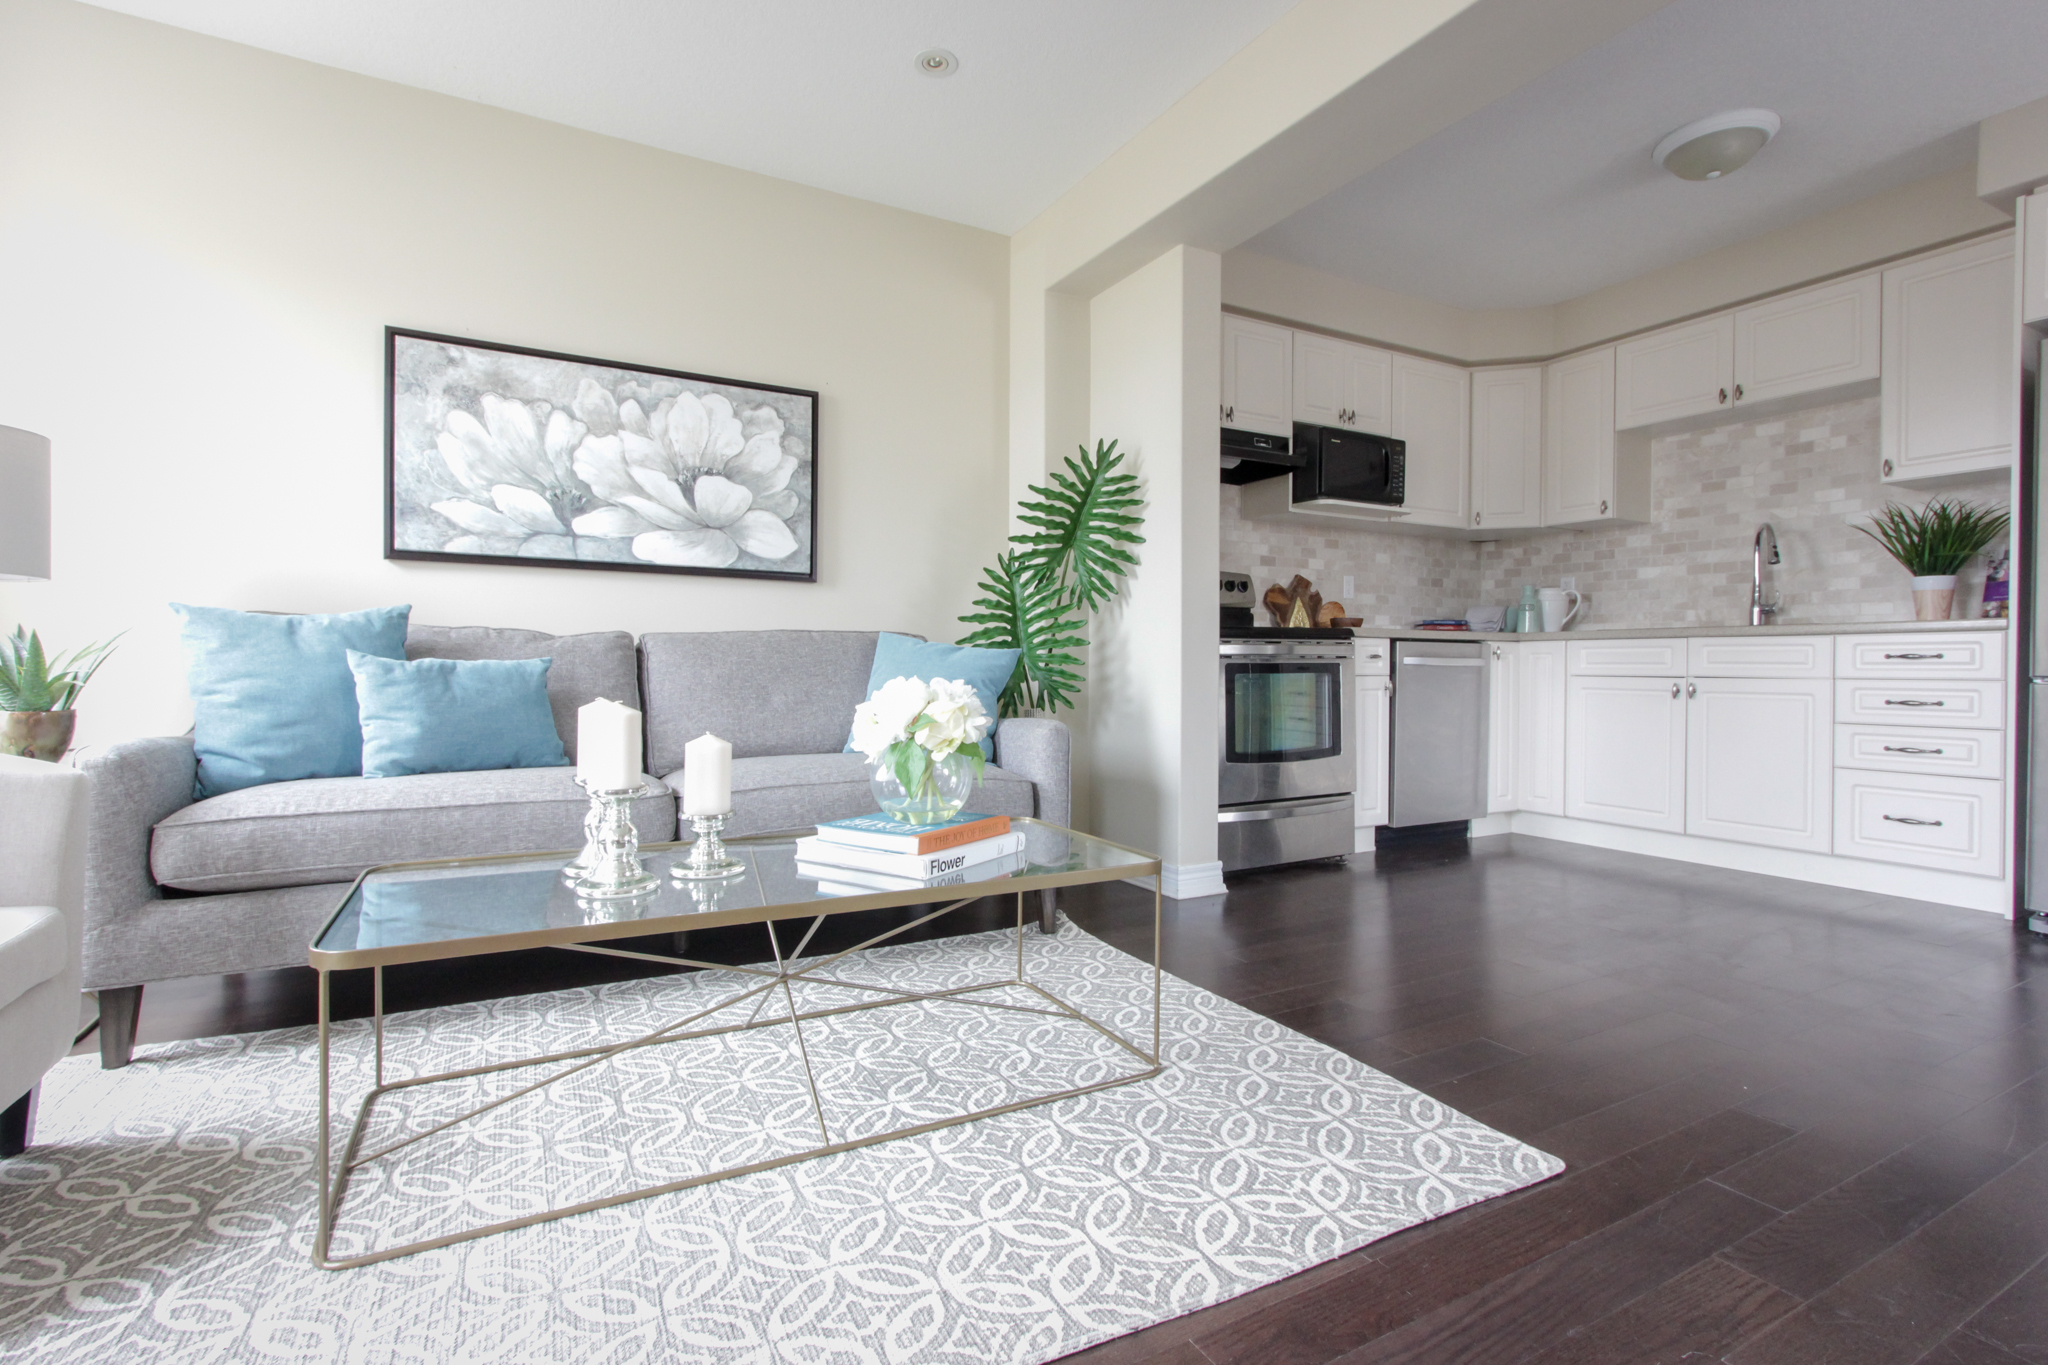 Home Staging provided by New Leaf Decor of living room - neutral furniture with pops of colour add appeal